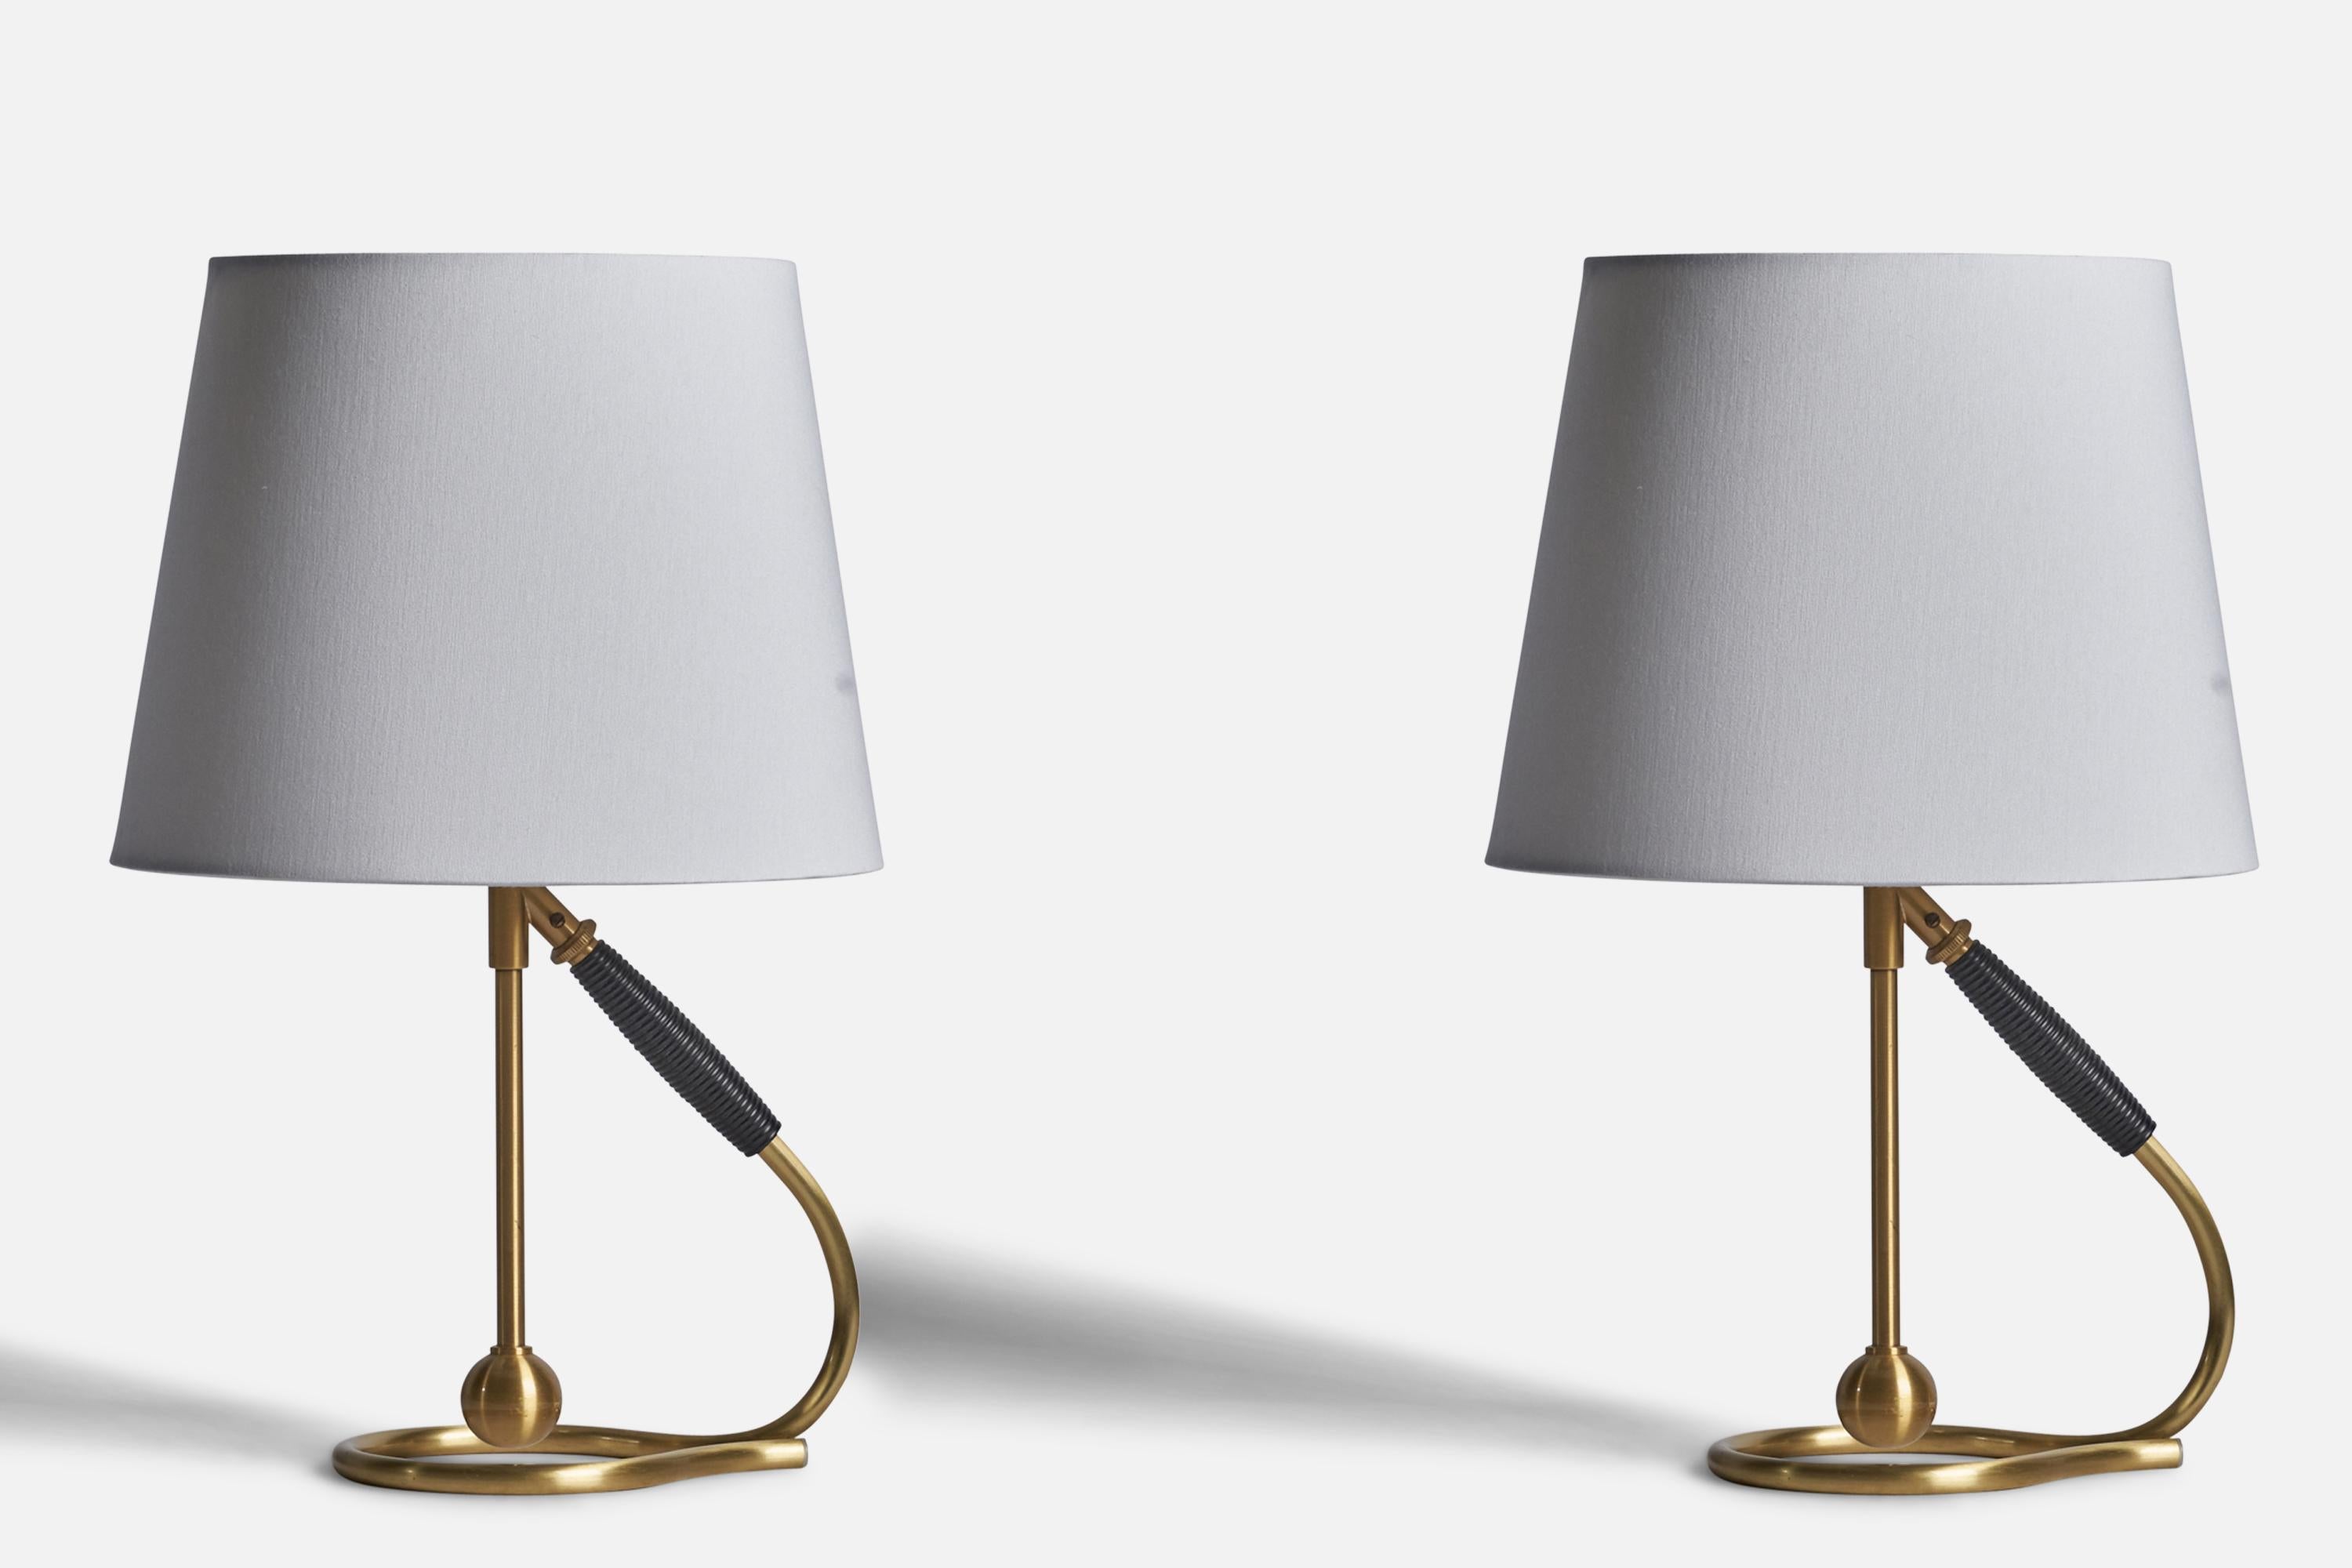 A pair of adjustable brass and rubber table or wall lights designed by Kaare Klint and produced by Le Klint, Denmark, c. 1950s.

Dimensions of Lamp (inches): 11.5” H x 4.75” W x 7” D
Dimensions of Shade (inches): 7.5” Top Diameter x 10” Bottom